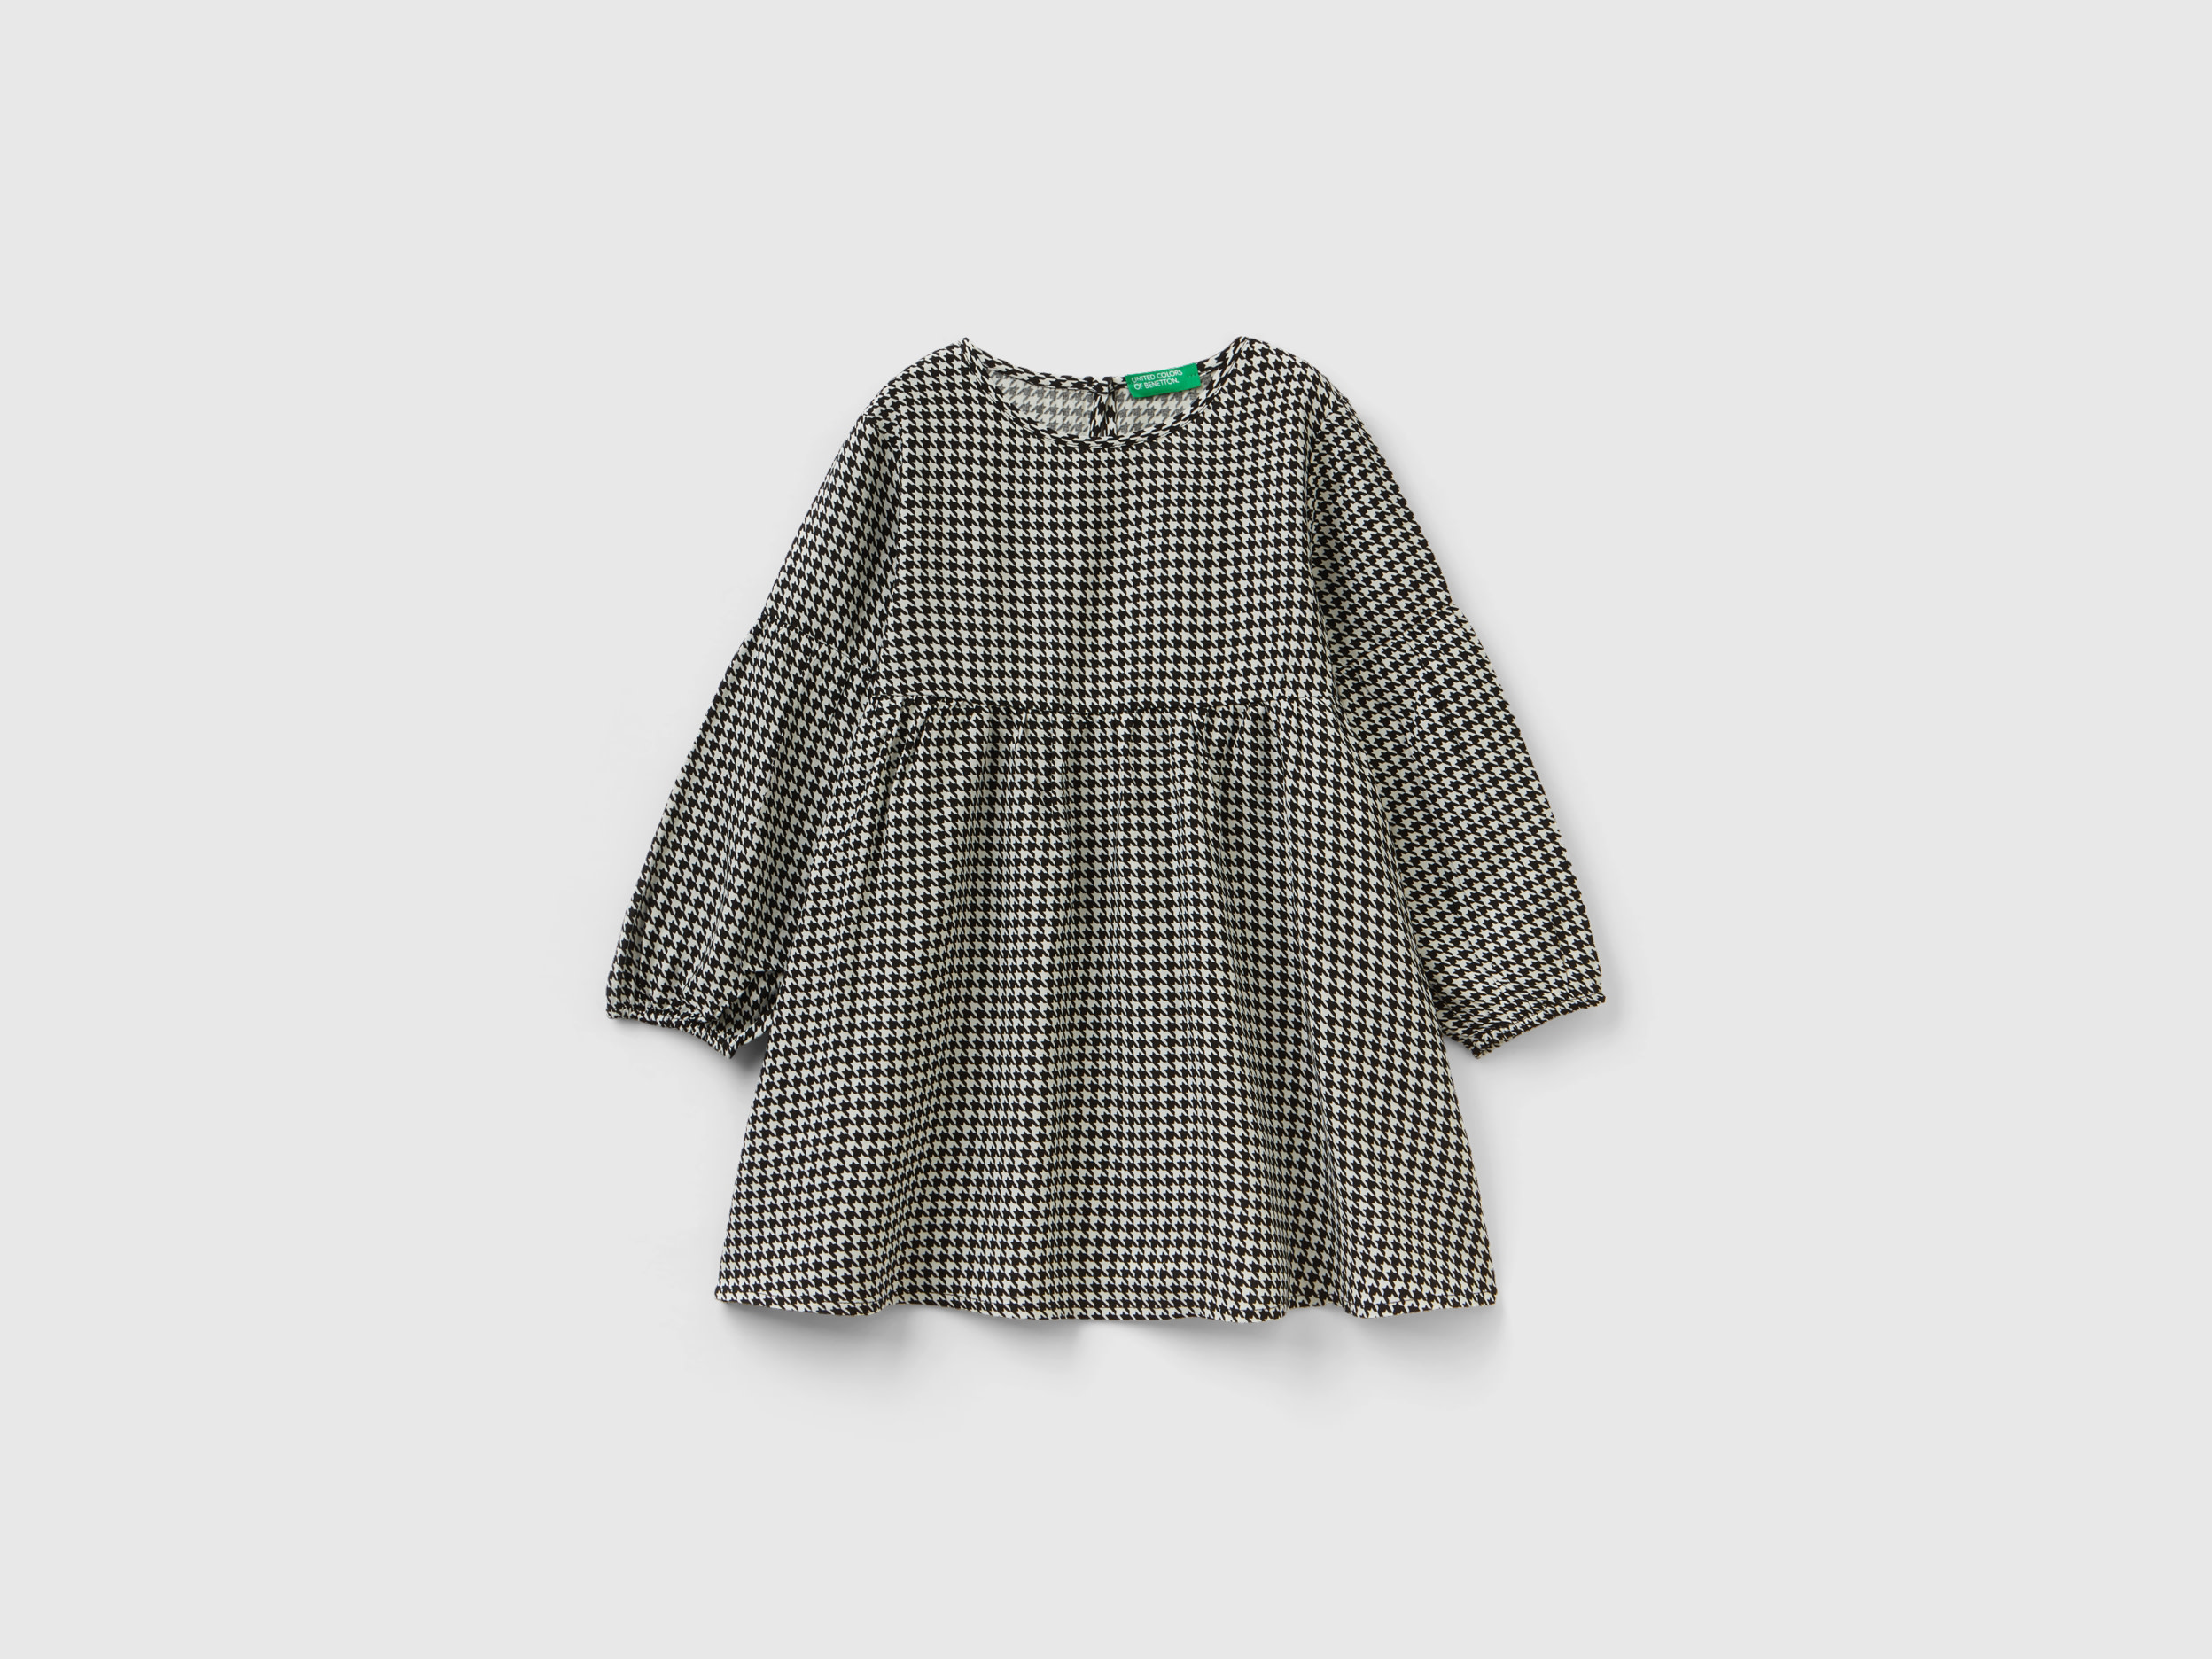 Benetton, Houndstooth Dress In Sustainable Viscose, size 5-6, Black, Kids